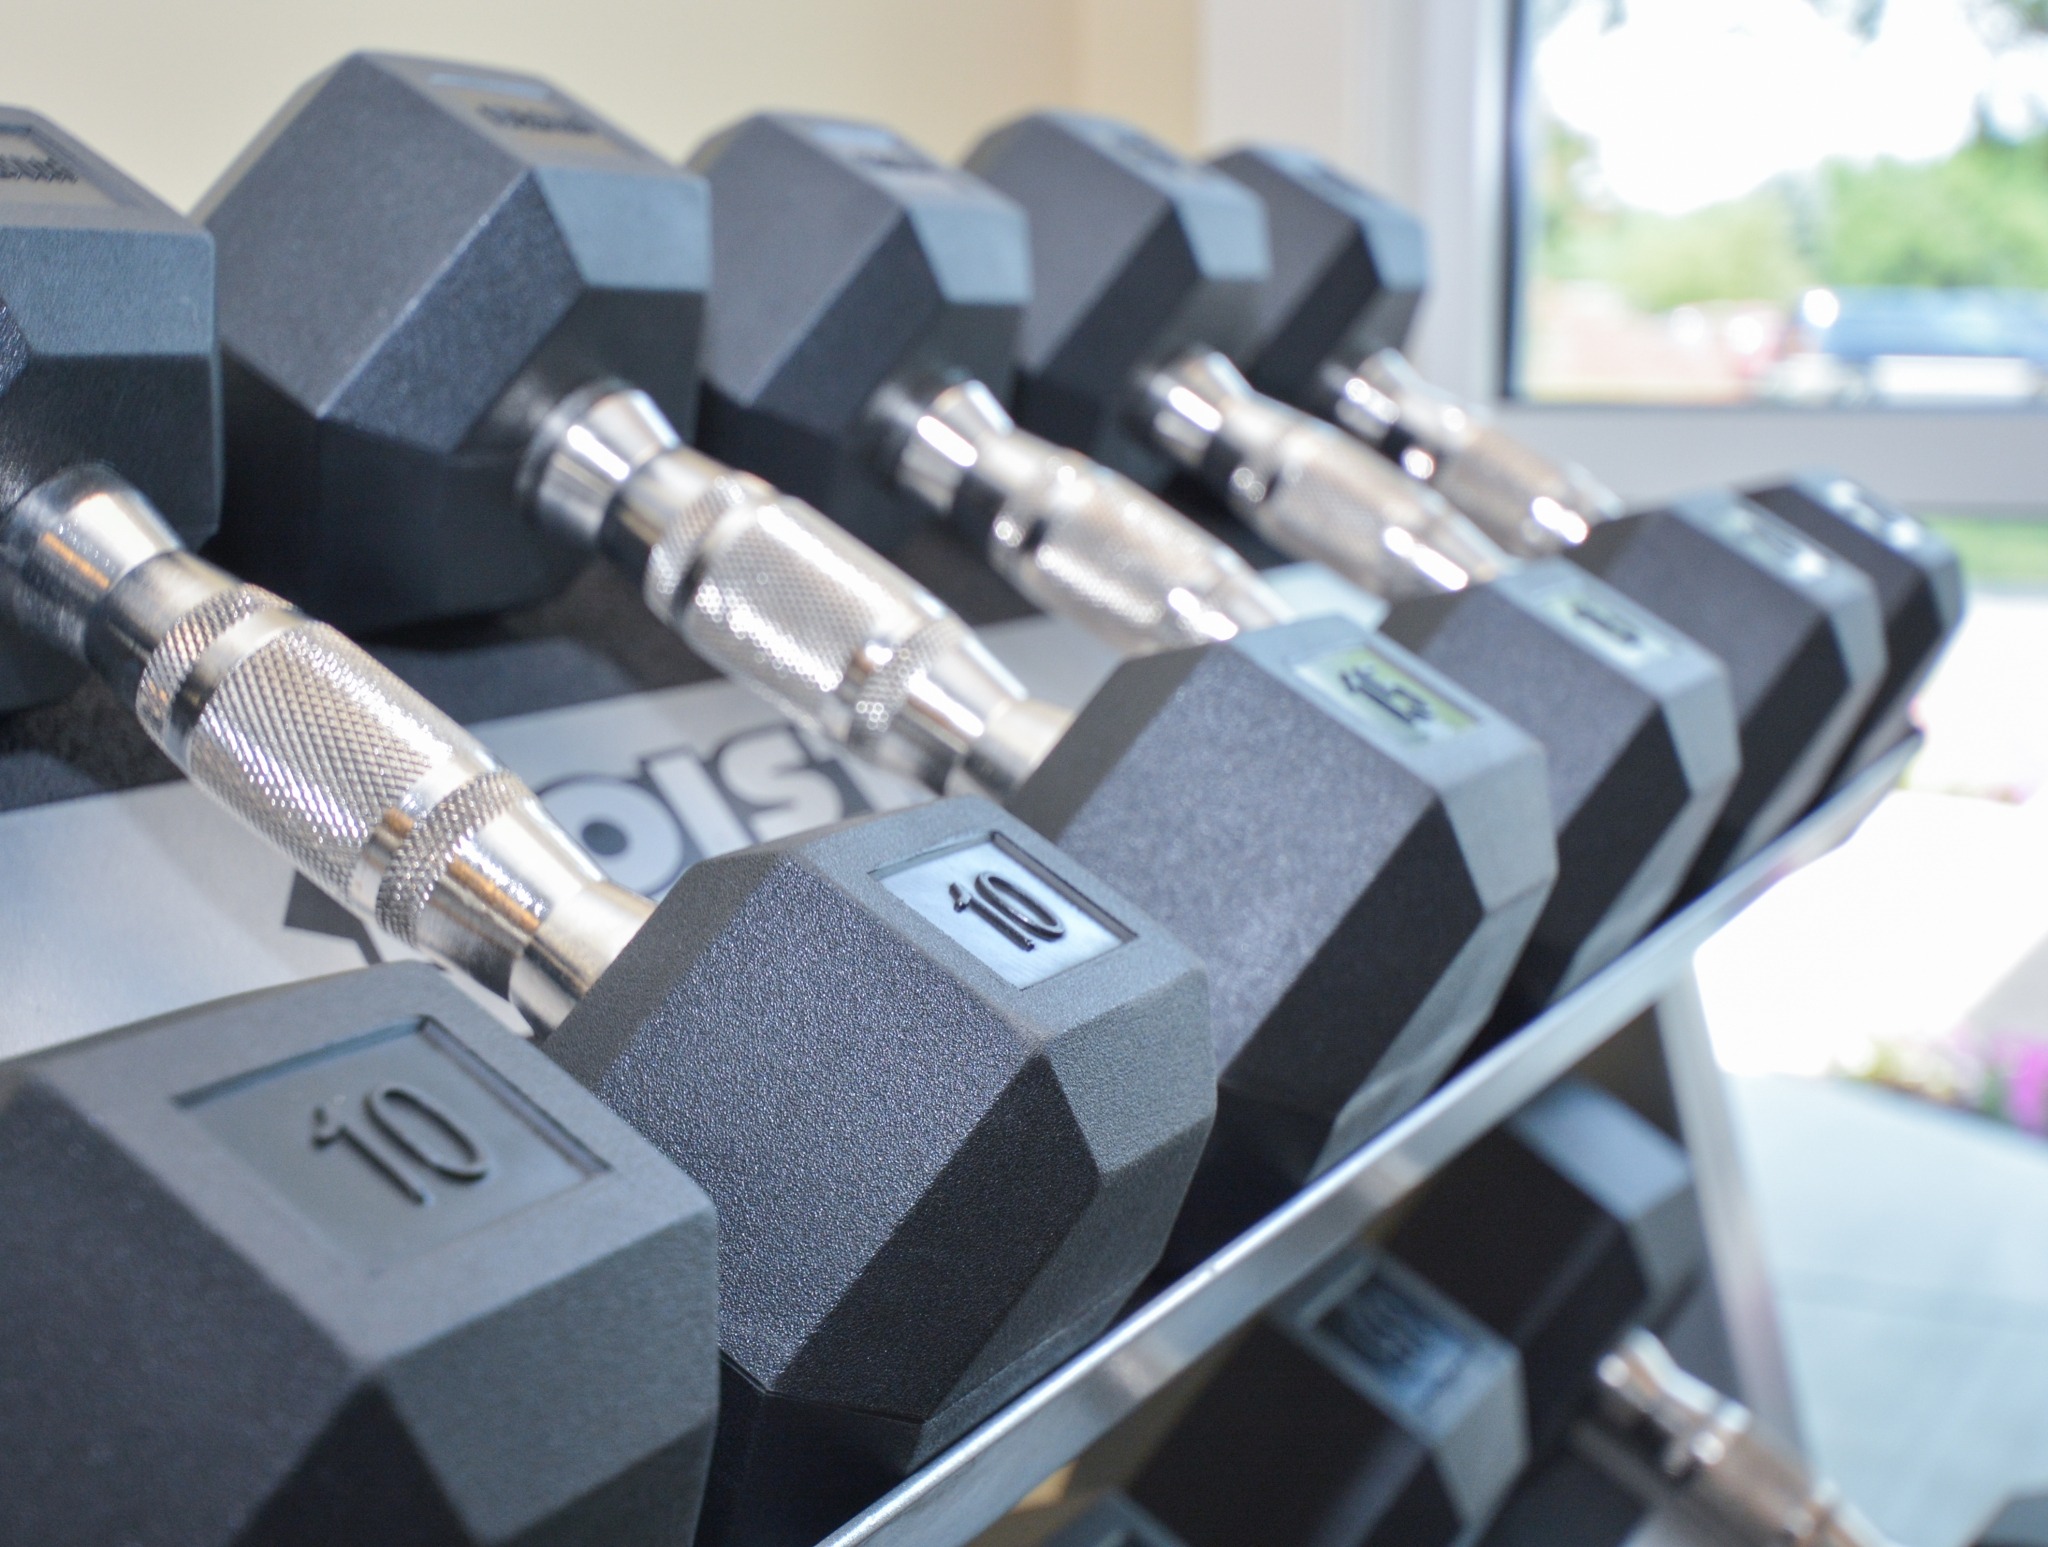 Fitness center area of our community, fitted with dumbells